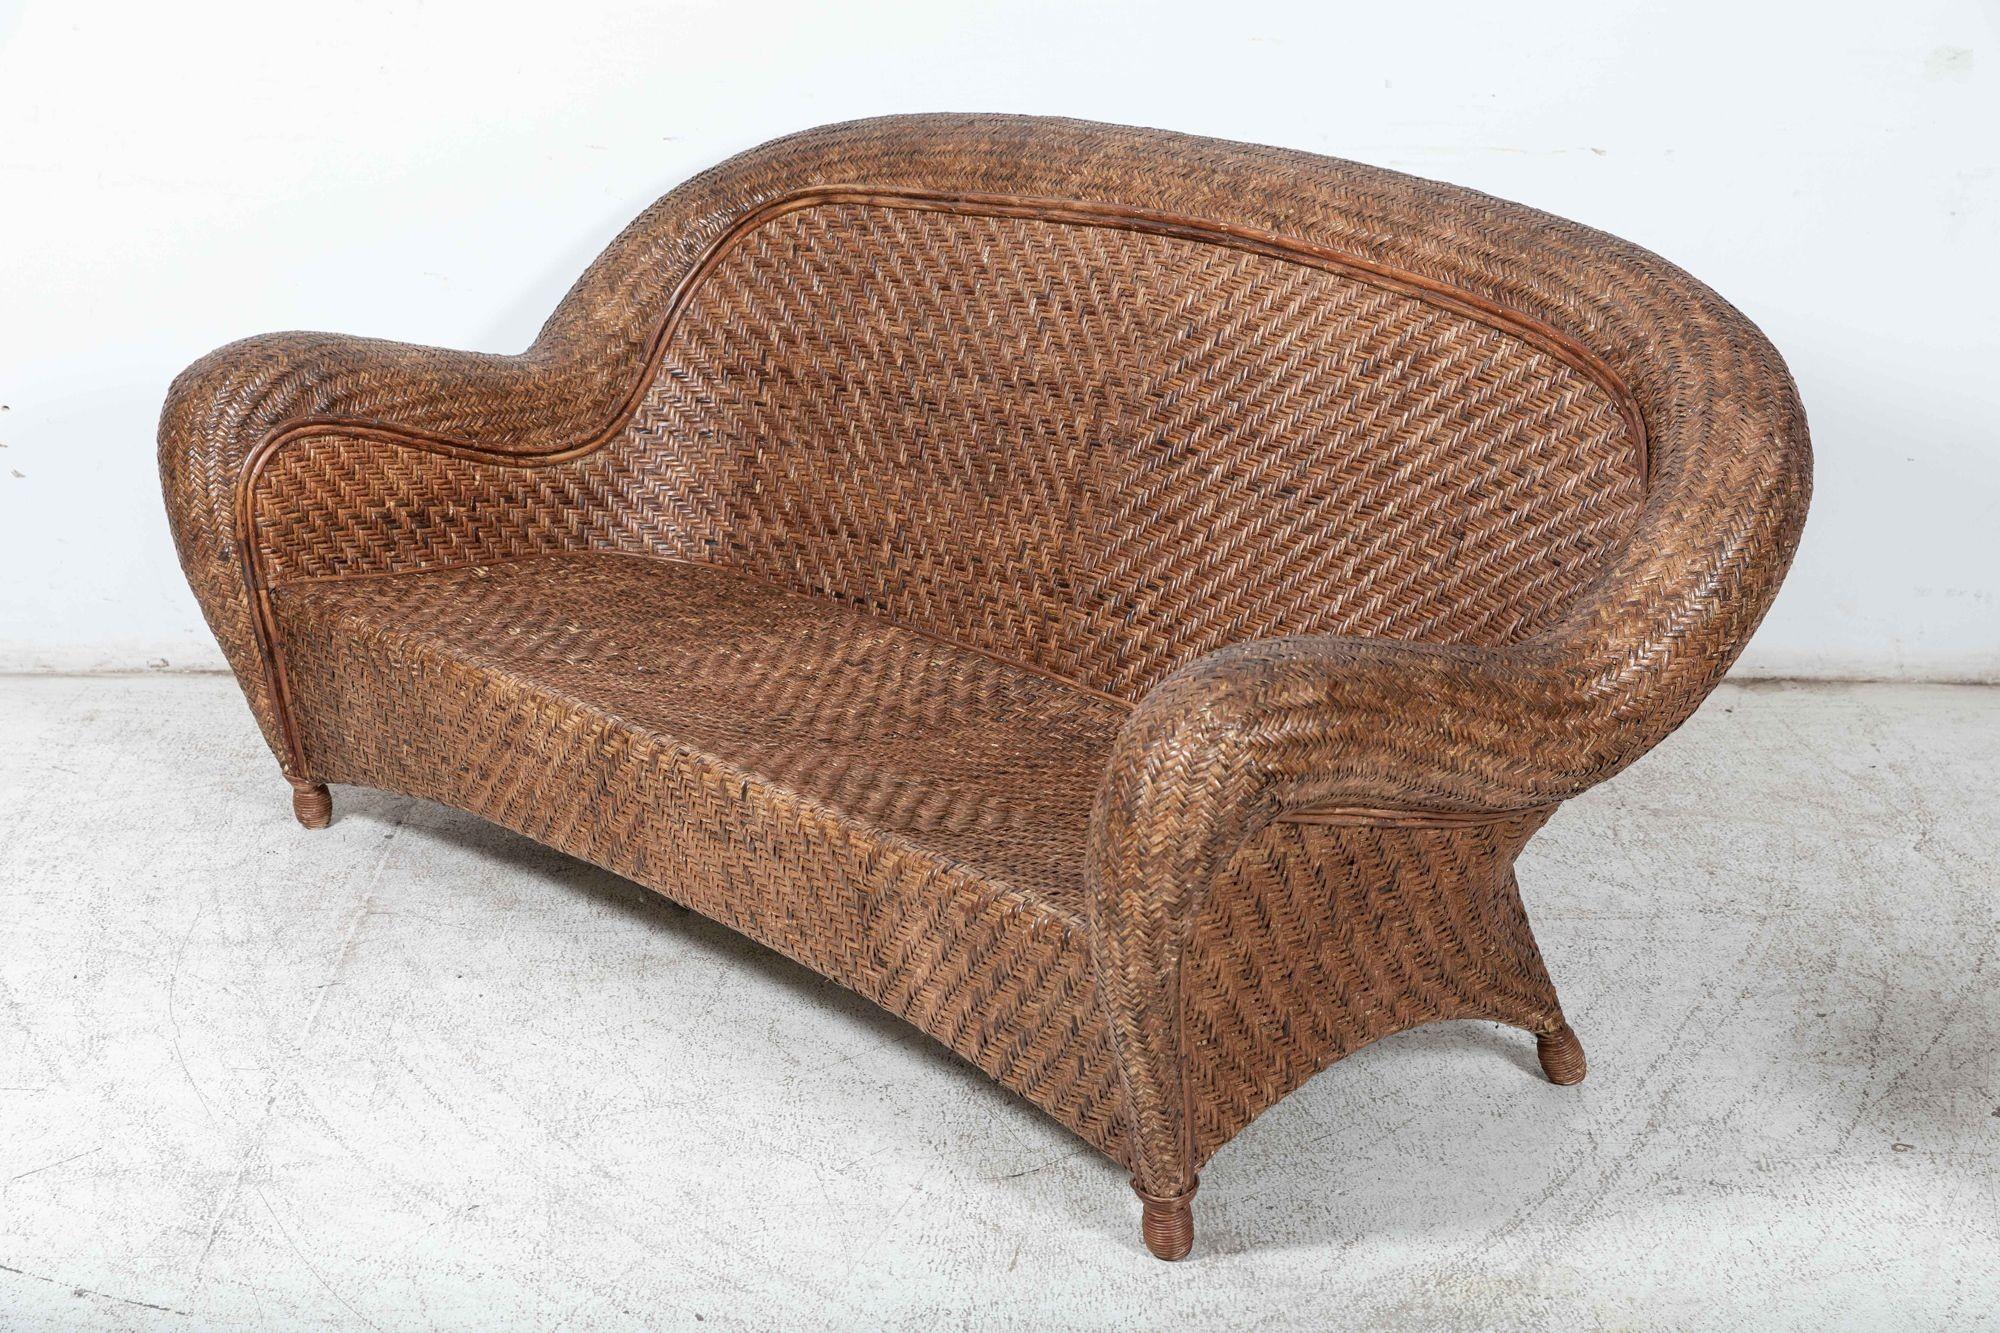 circa 1930
French bamboo rattan sofa suite including sofa, armchair and coffee table
Excellent form and patination
sku 1089
Sofa W186 x D61 x H87 cm
Chair W88 x D61 x H87 cm
Coffee table W93 x D63 x H36 cm.